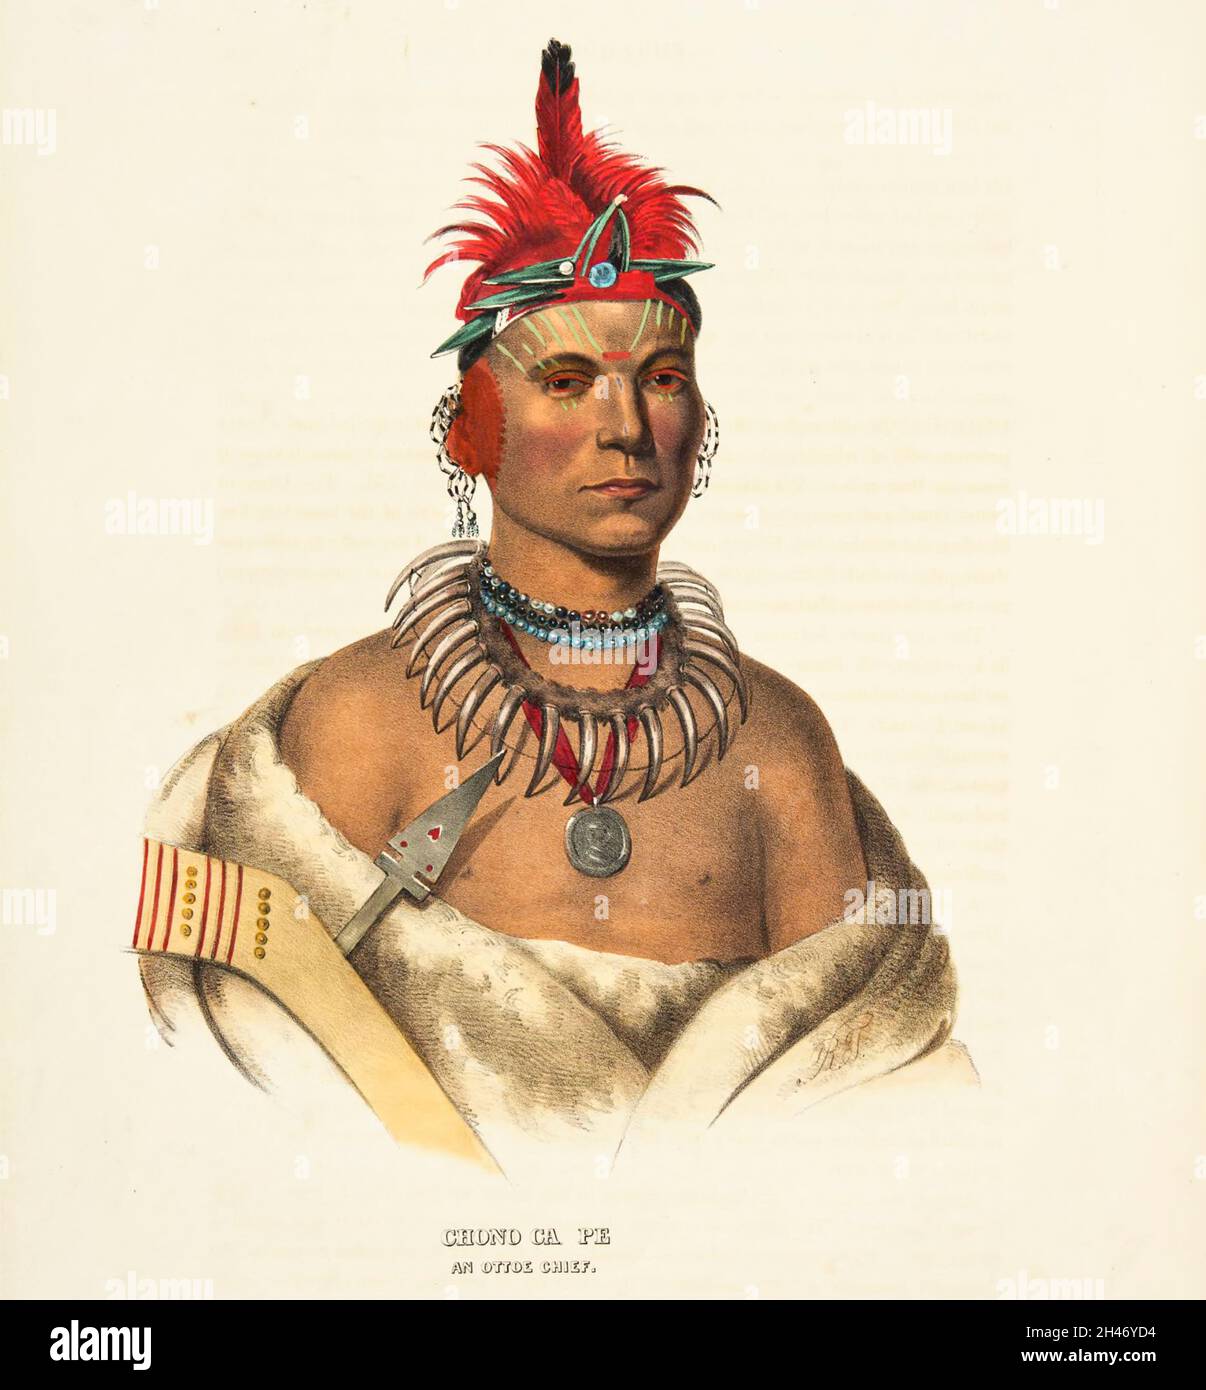 Chono Ca Pe was a Native American chief of the Otoe tribe. from the book ' History of the Indian Tribes of North America with biographical sketches and anecdotes of the principal chiefs. ' Volume 1 of 3 by Thomas Loraine,McKenney and James Hall Esq. Published in 1838 Stock Photo